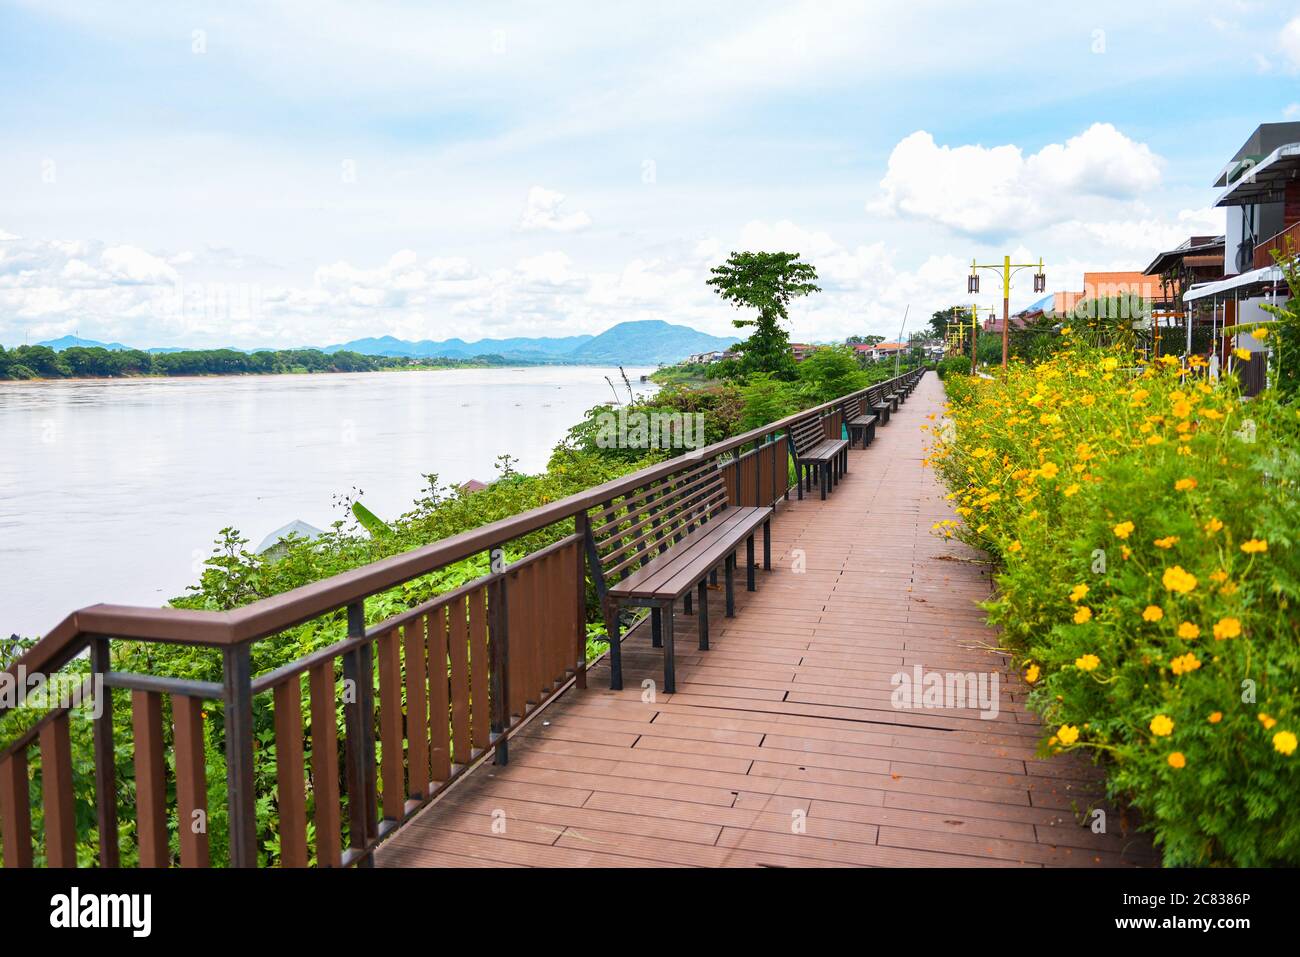 Wooden bench riverside walkway park with yellow flower and blue sky / Mekong river Chiang Khan Loei Thailand Stock Photo